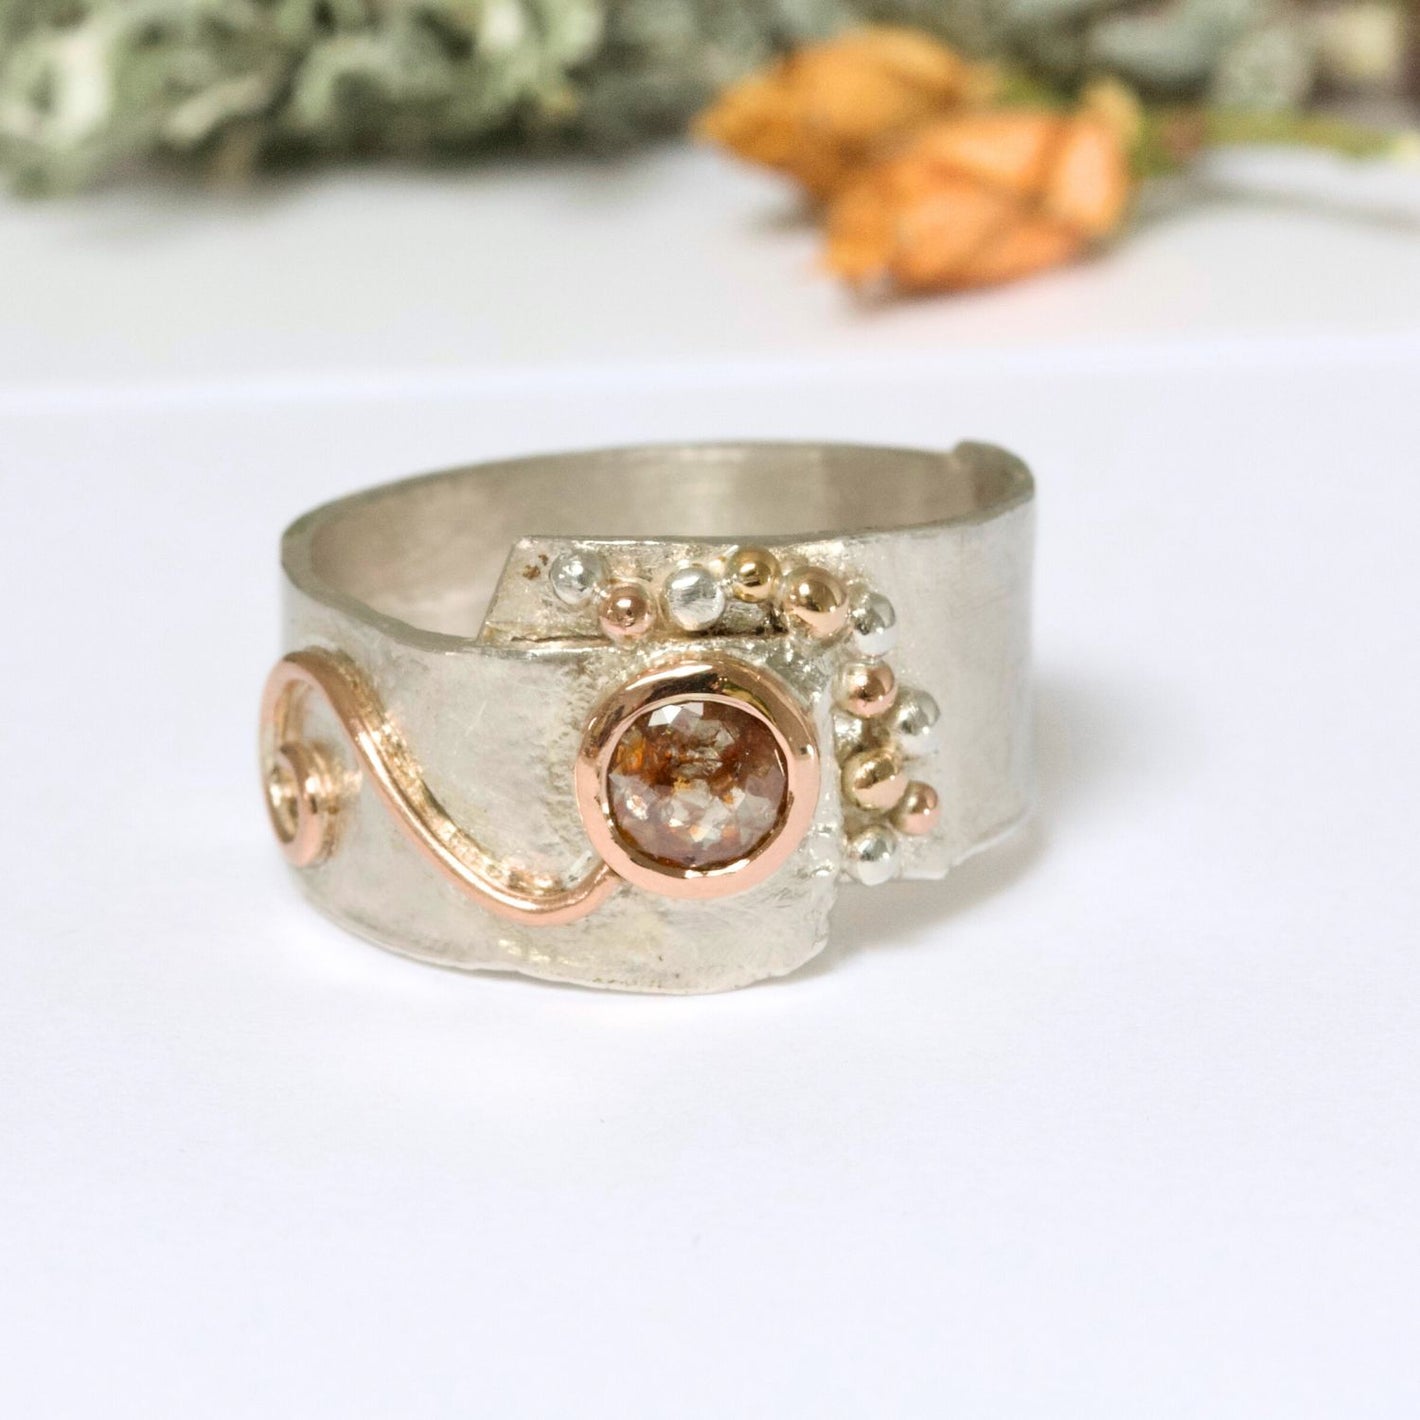 rose cut salt and pepper rustic diamond ring in a wide silver band with rose gold.